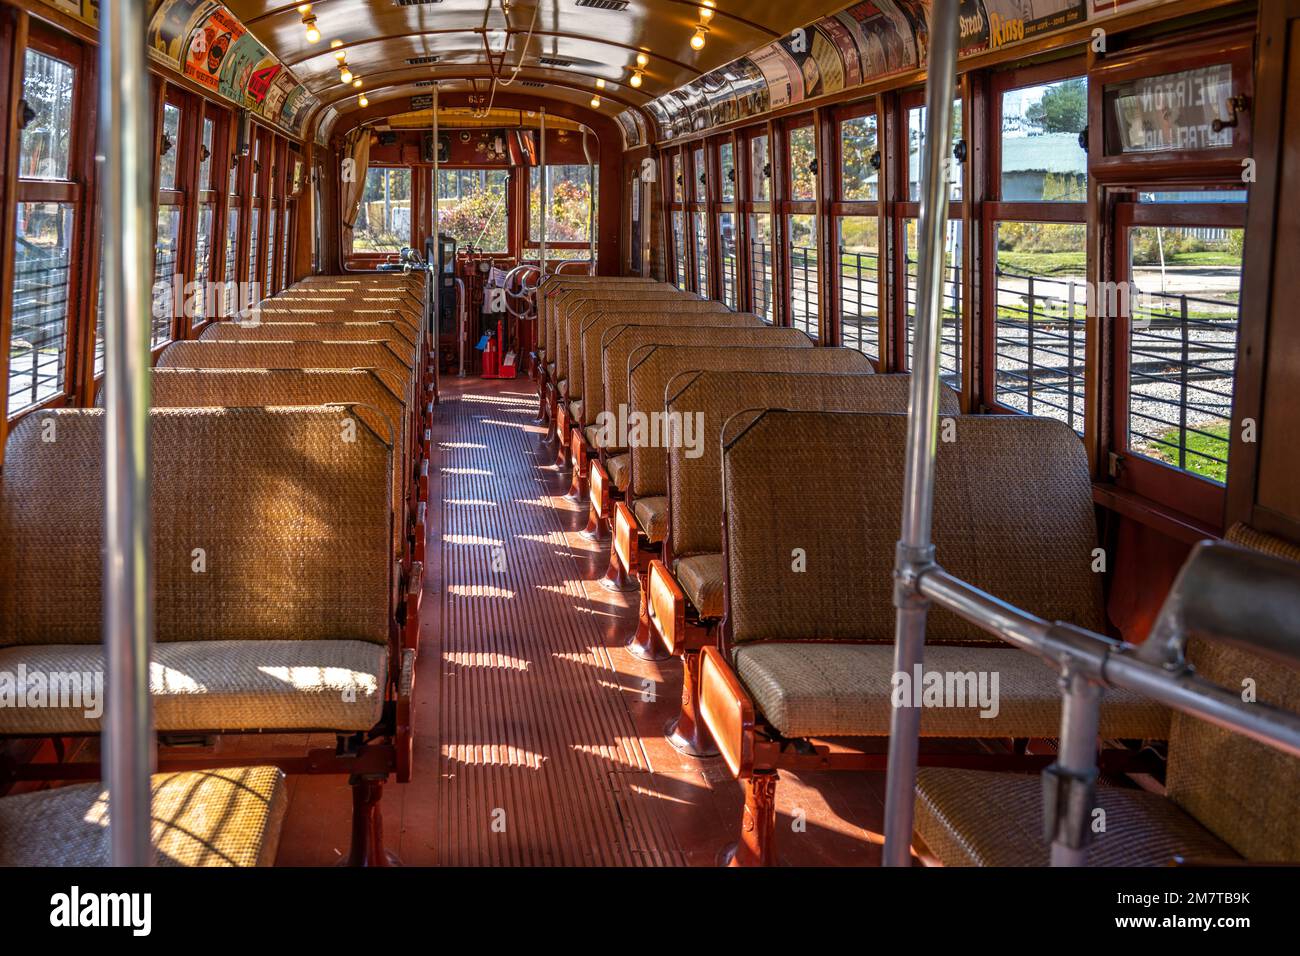 inside No 639 trolley car used to take visitors for a ride at the Seashore Trolley Museum Stock Photo